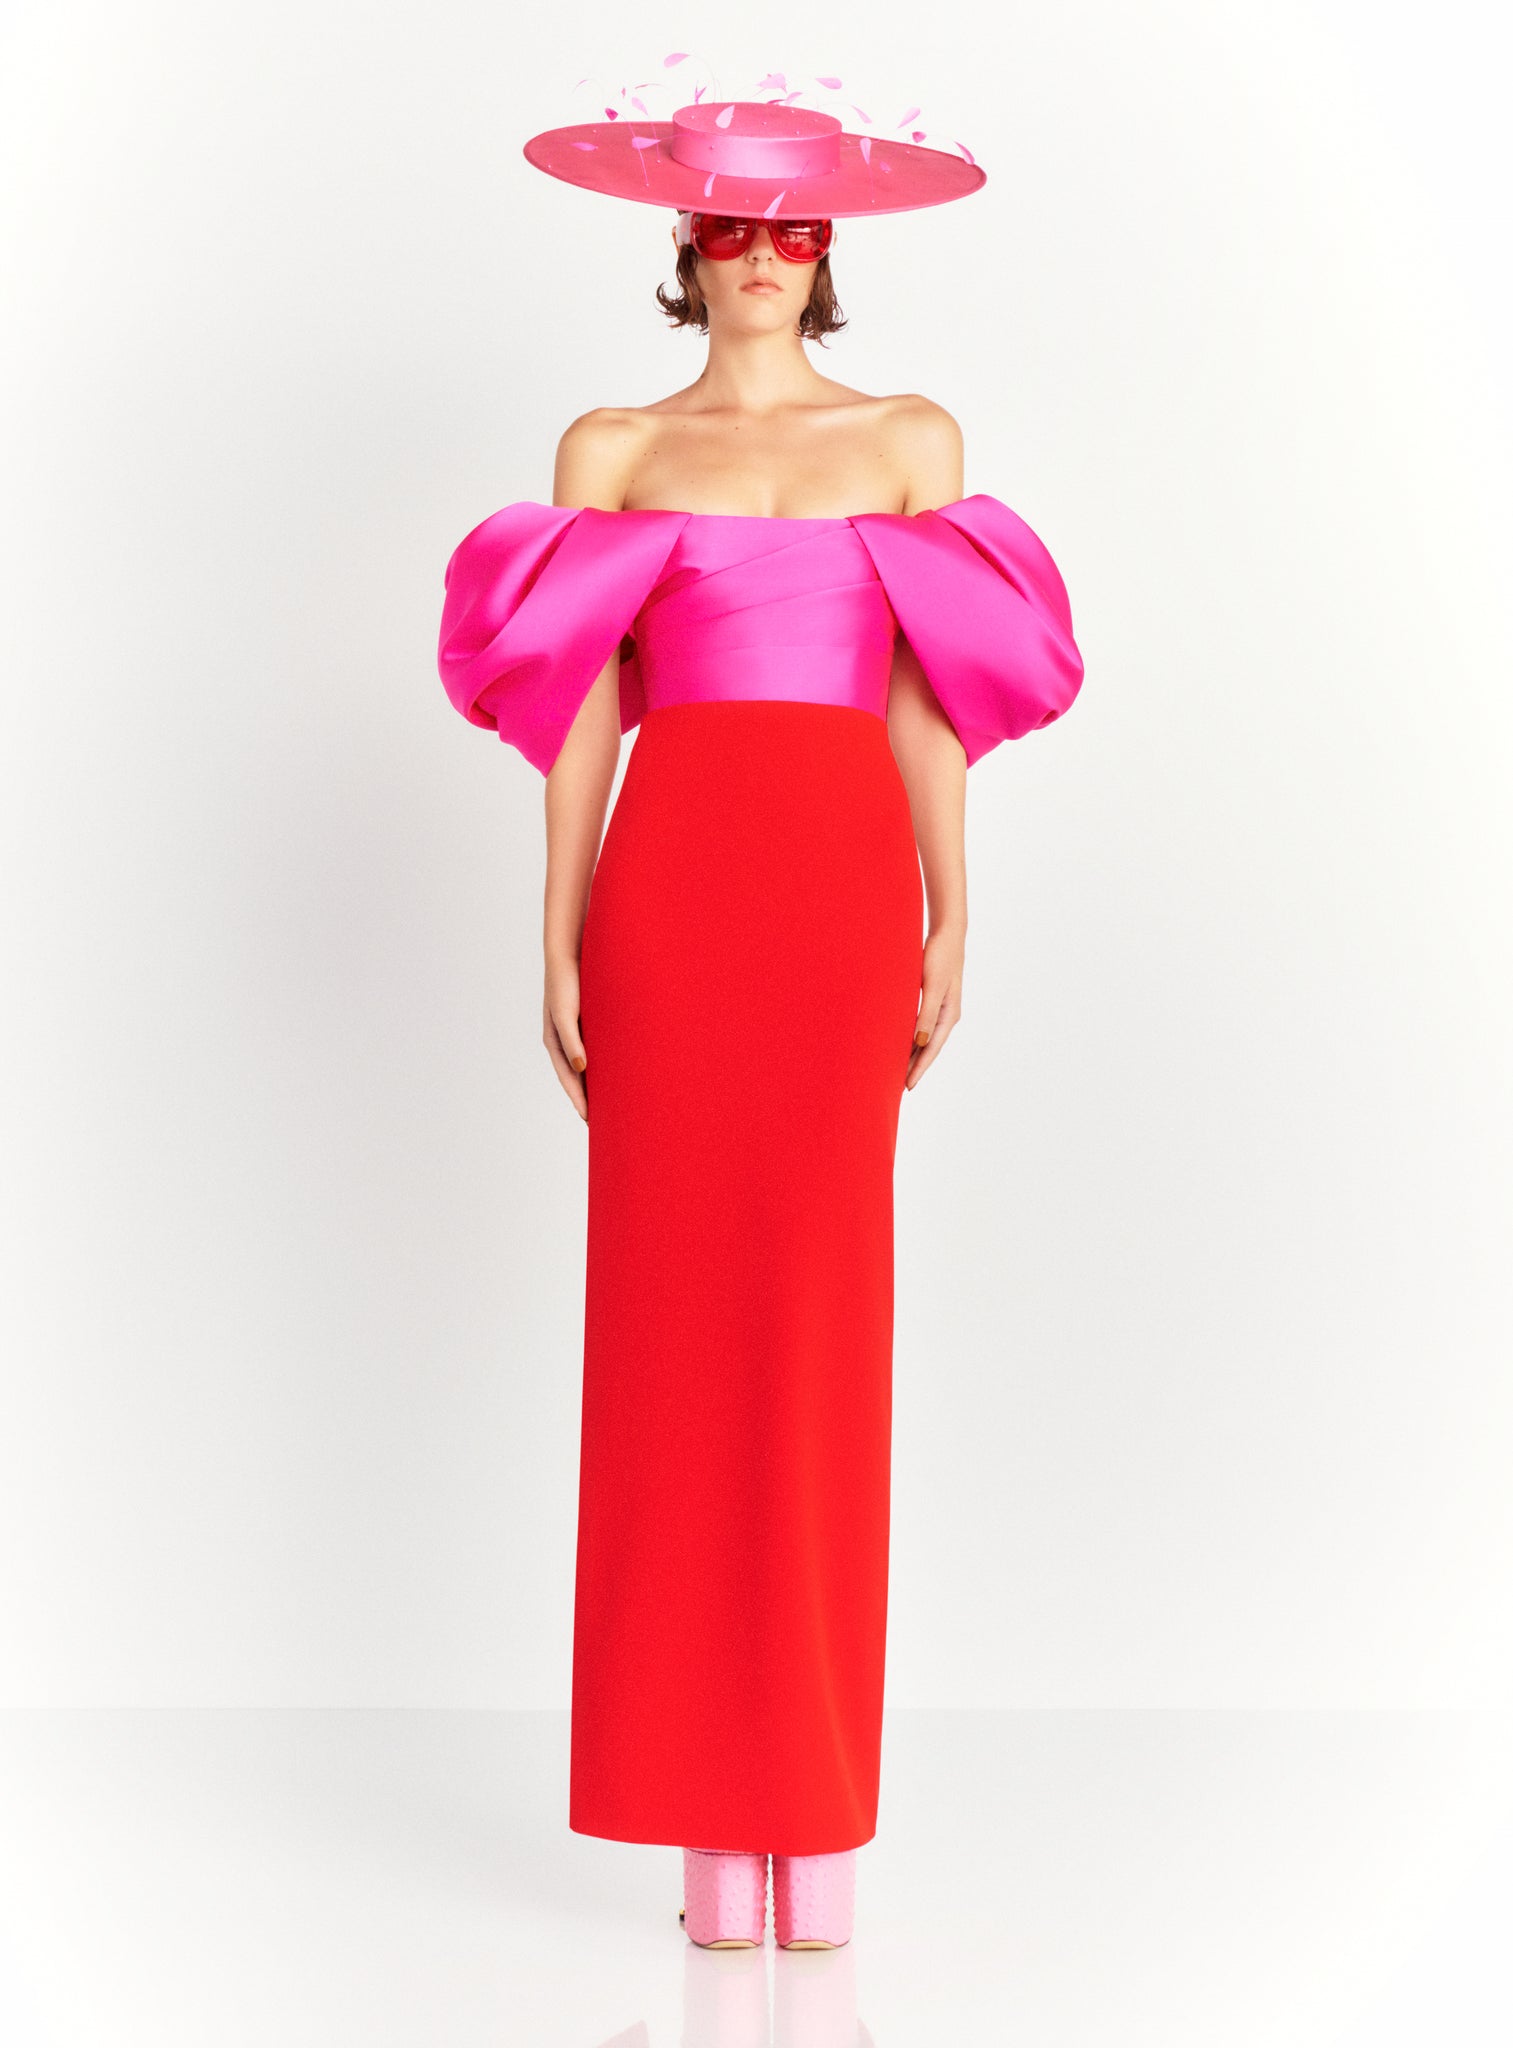 The Sian Maxi Dress in Pink and Red